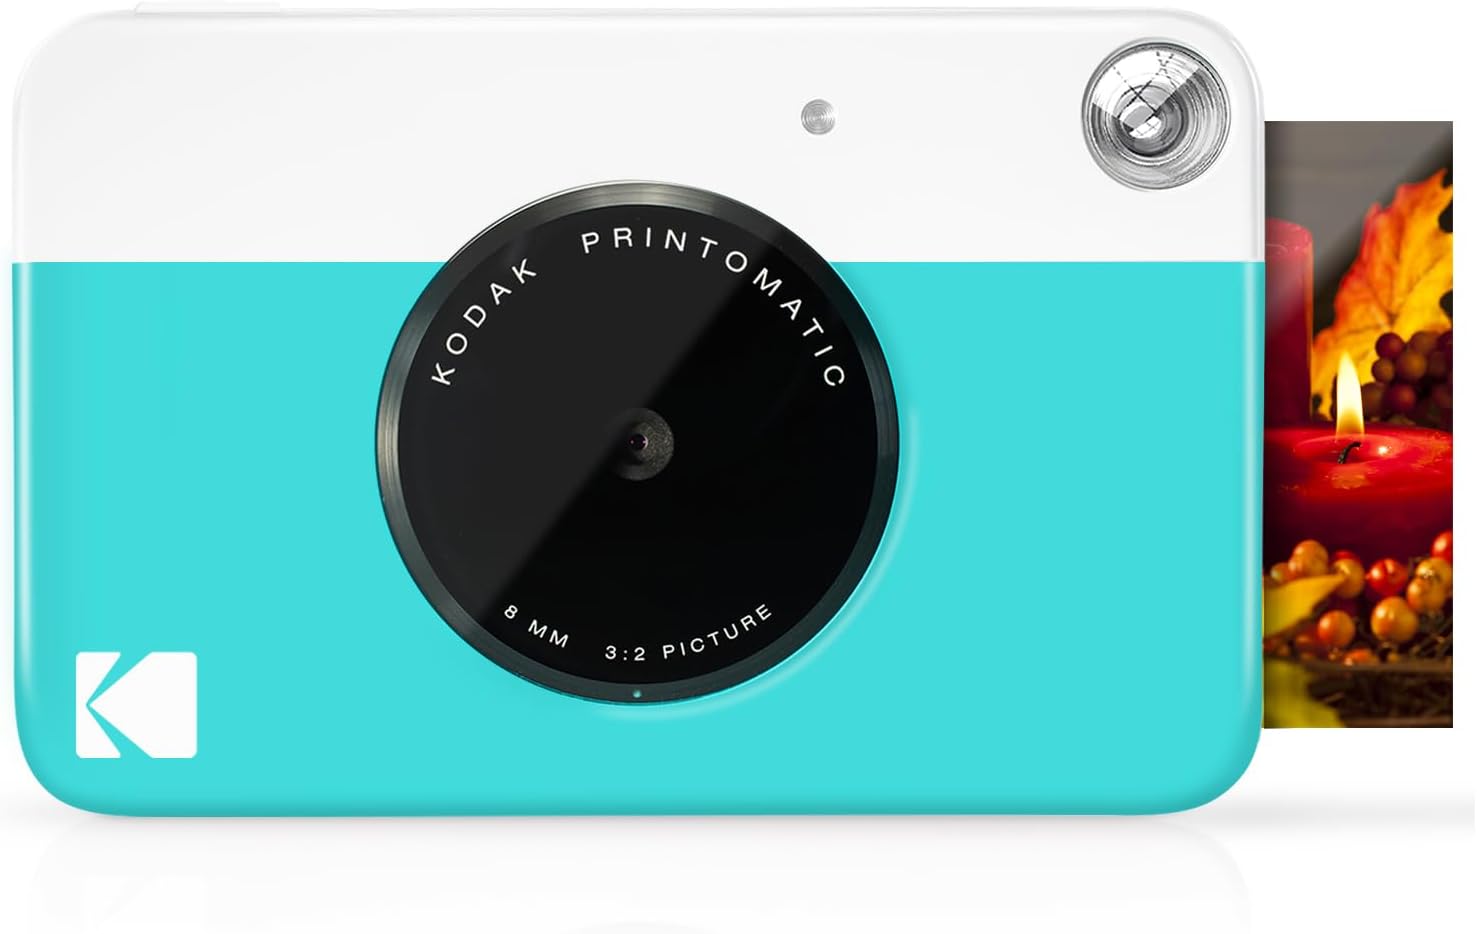 Digital Instant Print Camera With Sticky-Backed Photo - Full Color Prints - Optical Viewfinder - Built-in Flash By KODAK